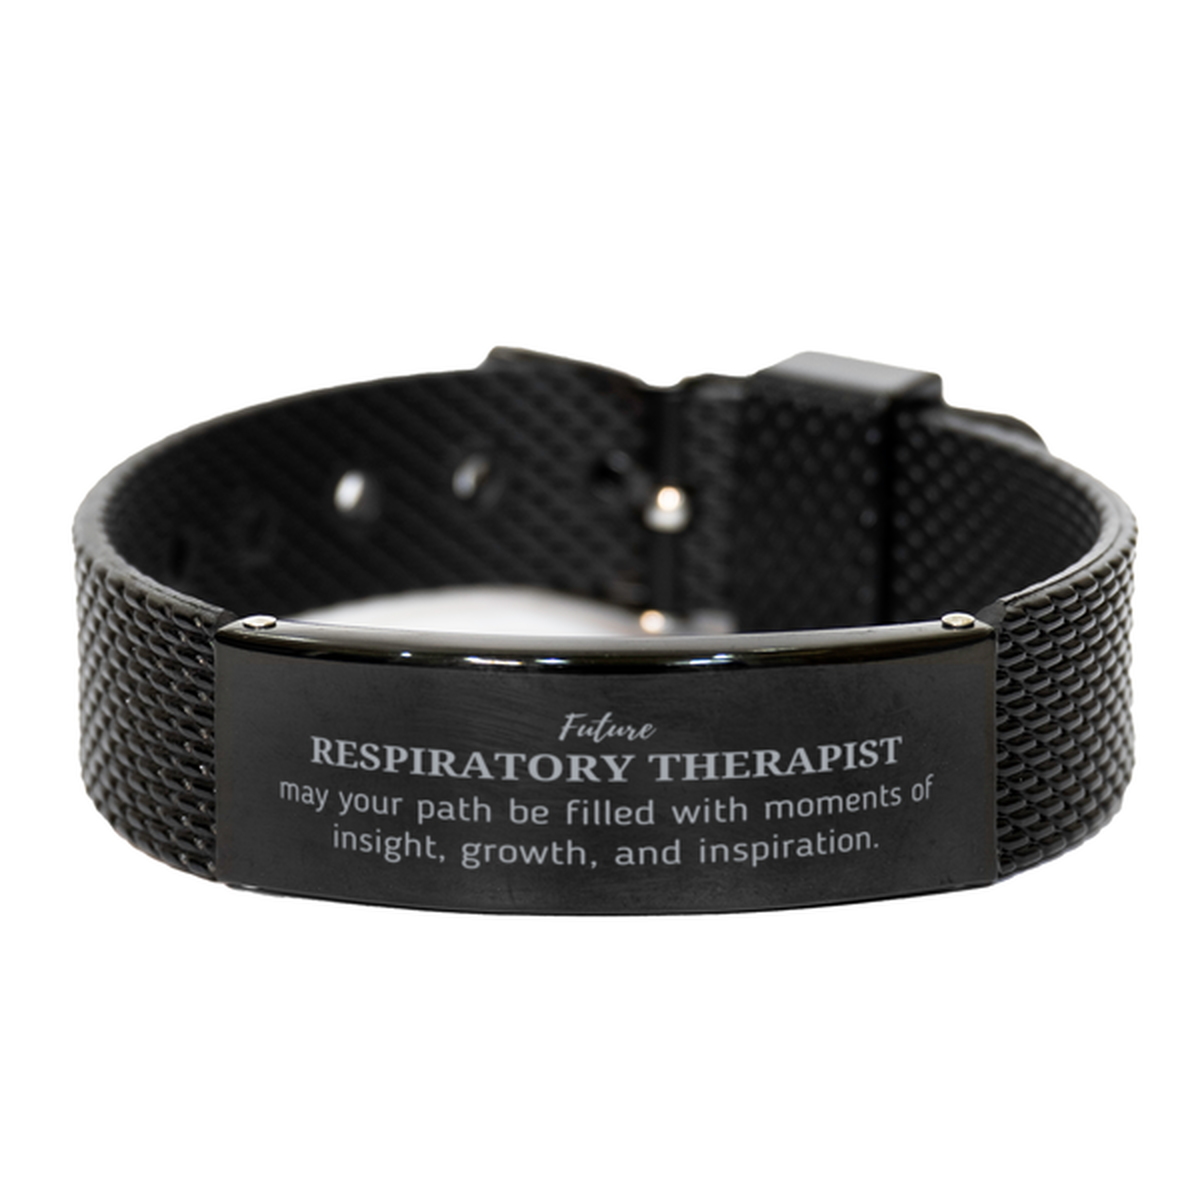 Future Respiratory Therapist Gifts, May your path be filled with moments of insight, Graduation Gifts for New Respiratory Therapist, Christmas Unique Black Shark Mesh Bracelet For Men, Women, Friends